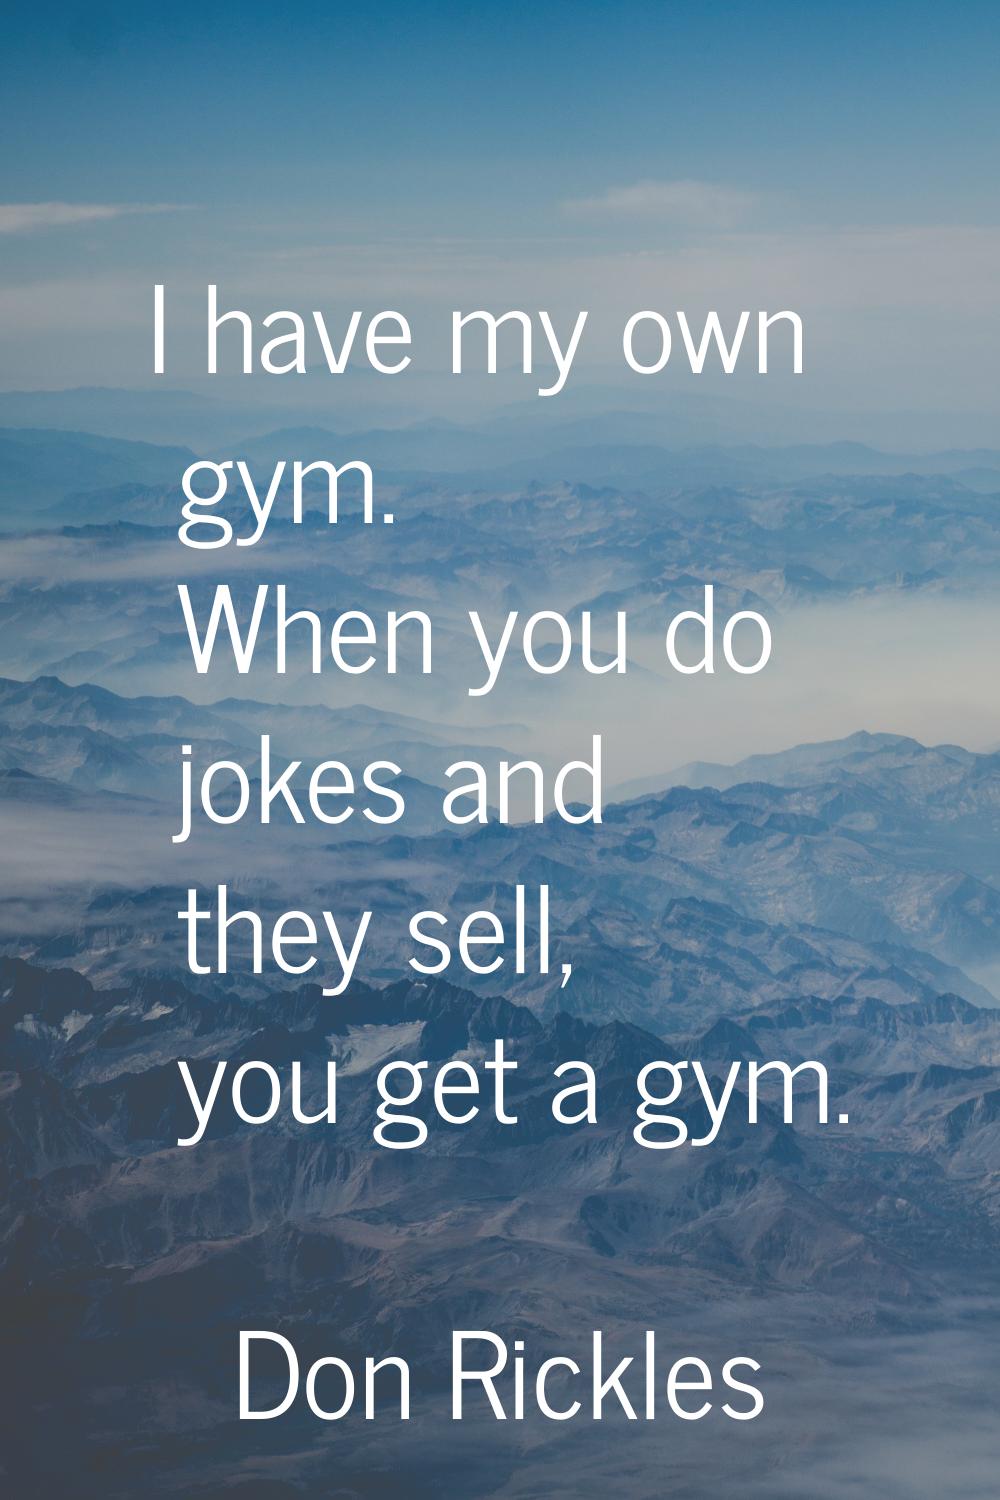 I have my own gym. When you do jokes and they sell, you get a gym.